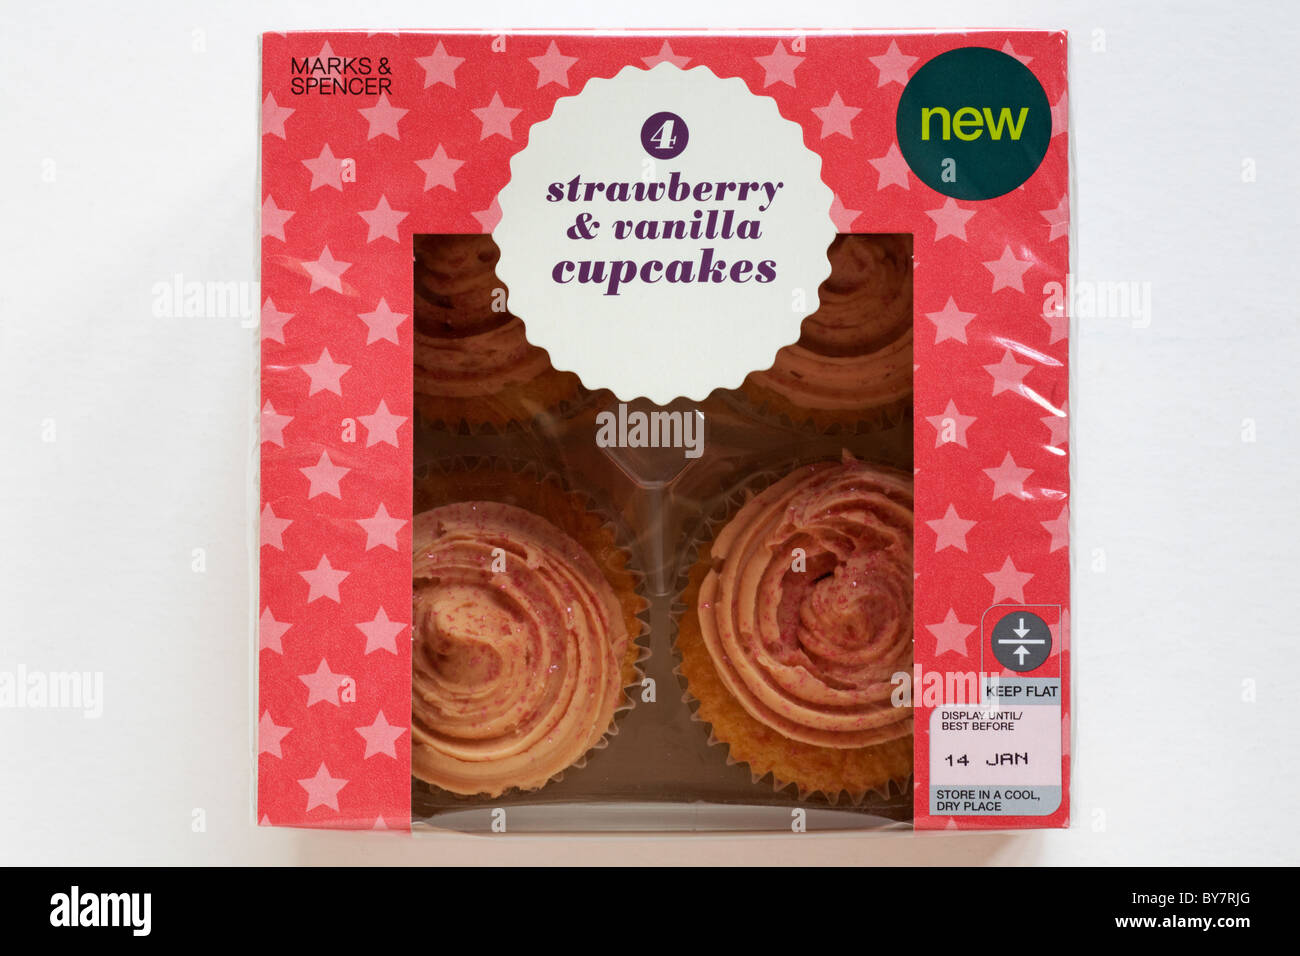 Pack of 4 Marks & Spencer strawberry and vanilla cupcakes isolated on white background Stock Photo